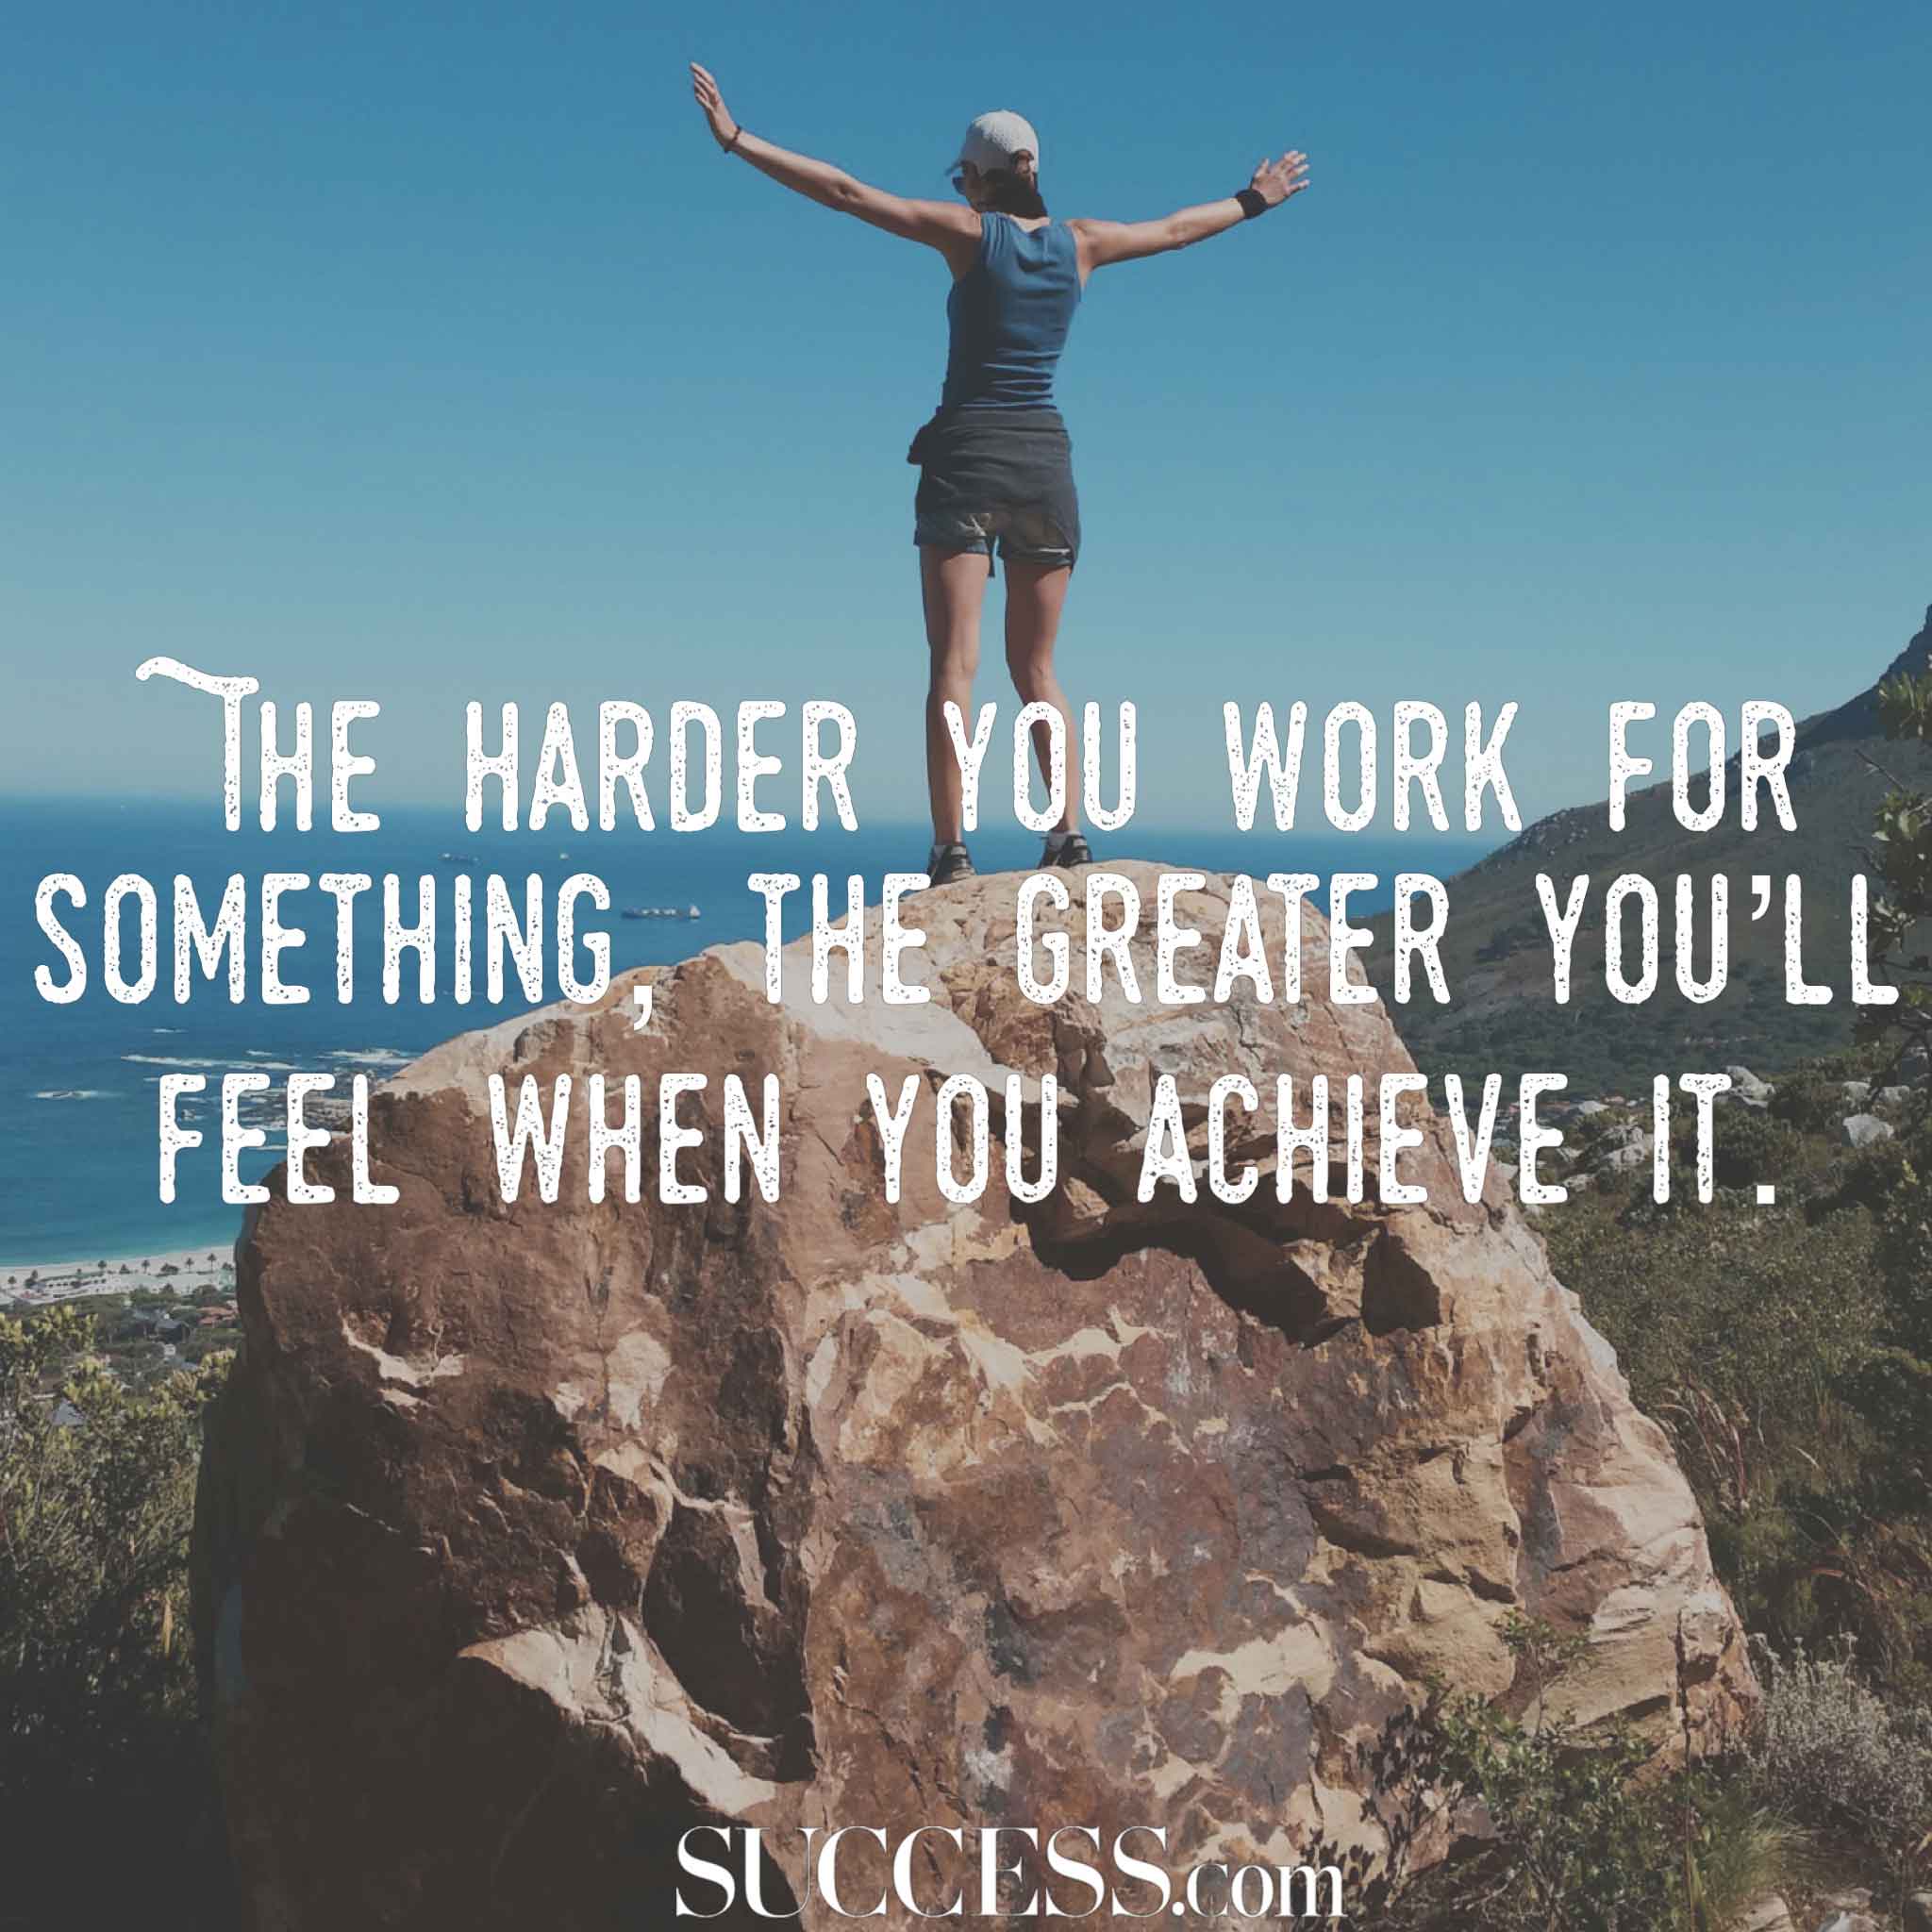 the harder you work for something the greater you’ll feel when you achieve it